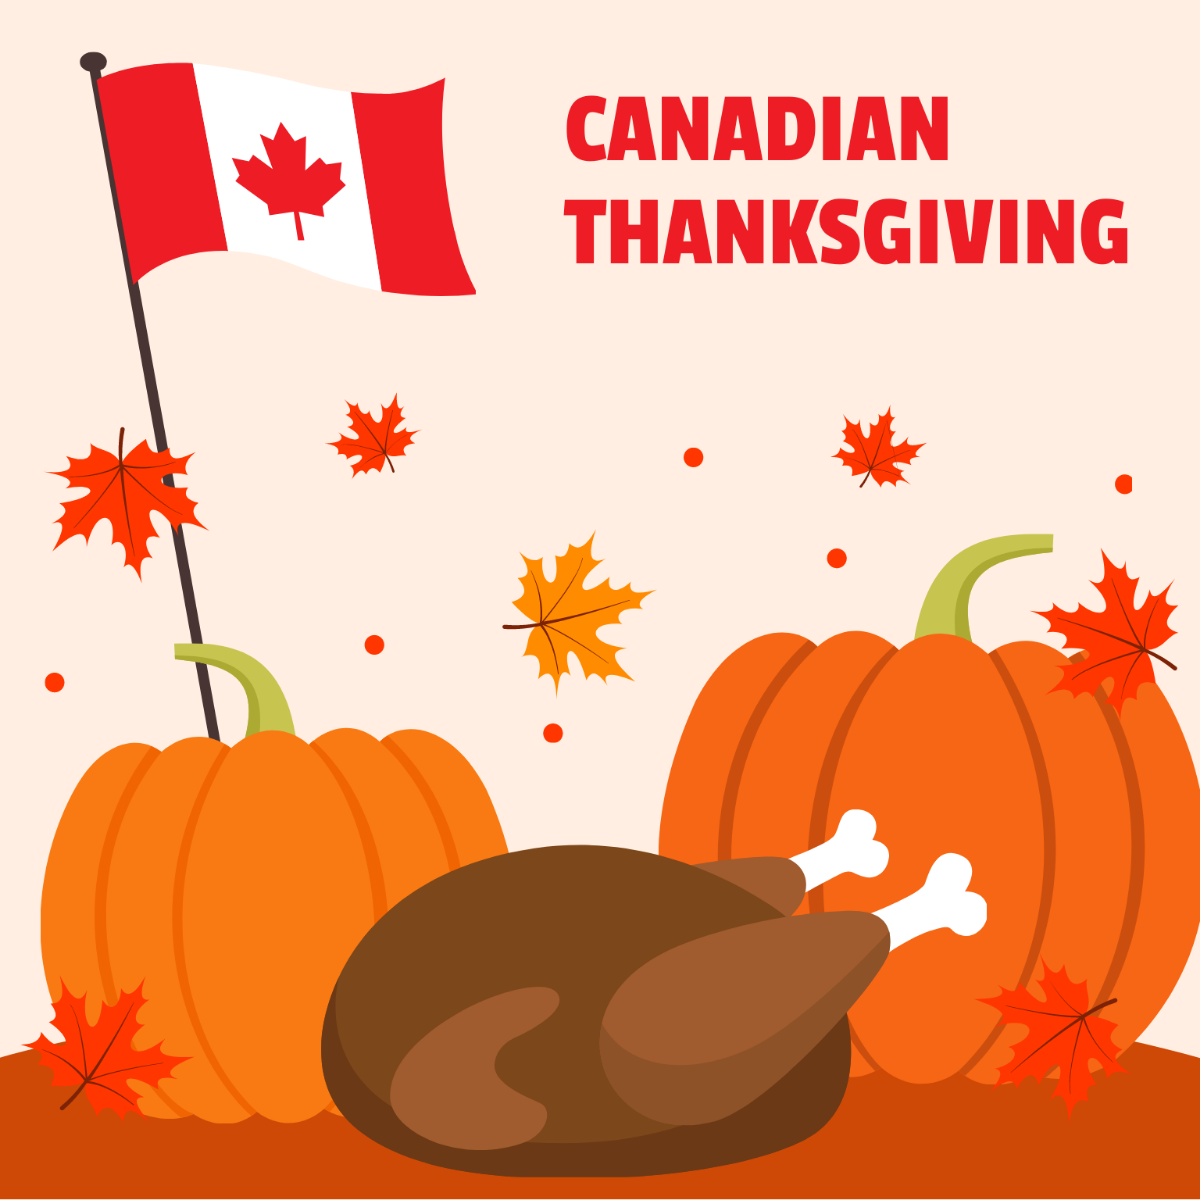 FREE Canadian Thanksgiving Vector Templates & Examples - Edit Online ...